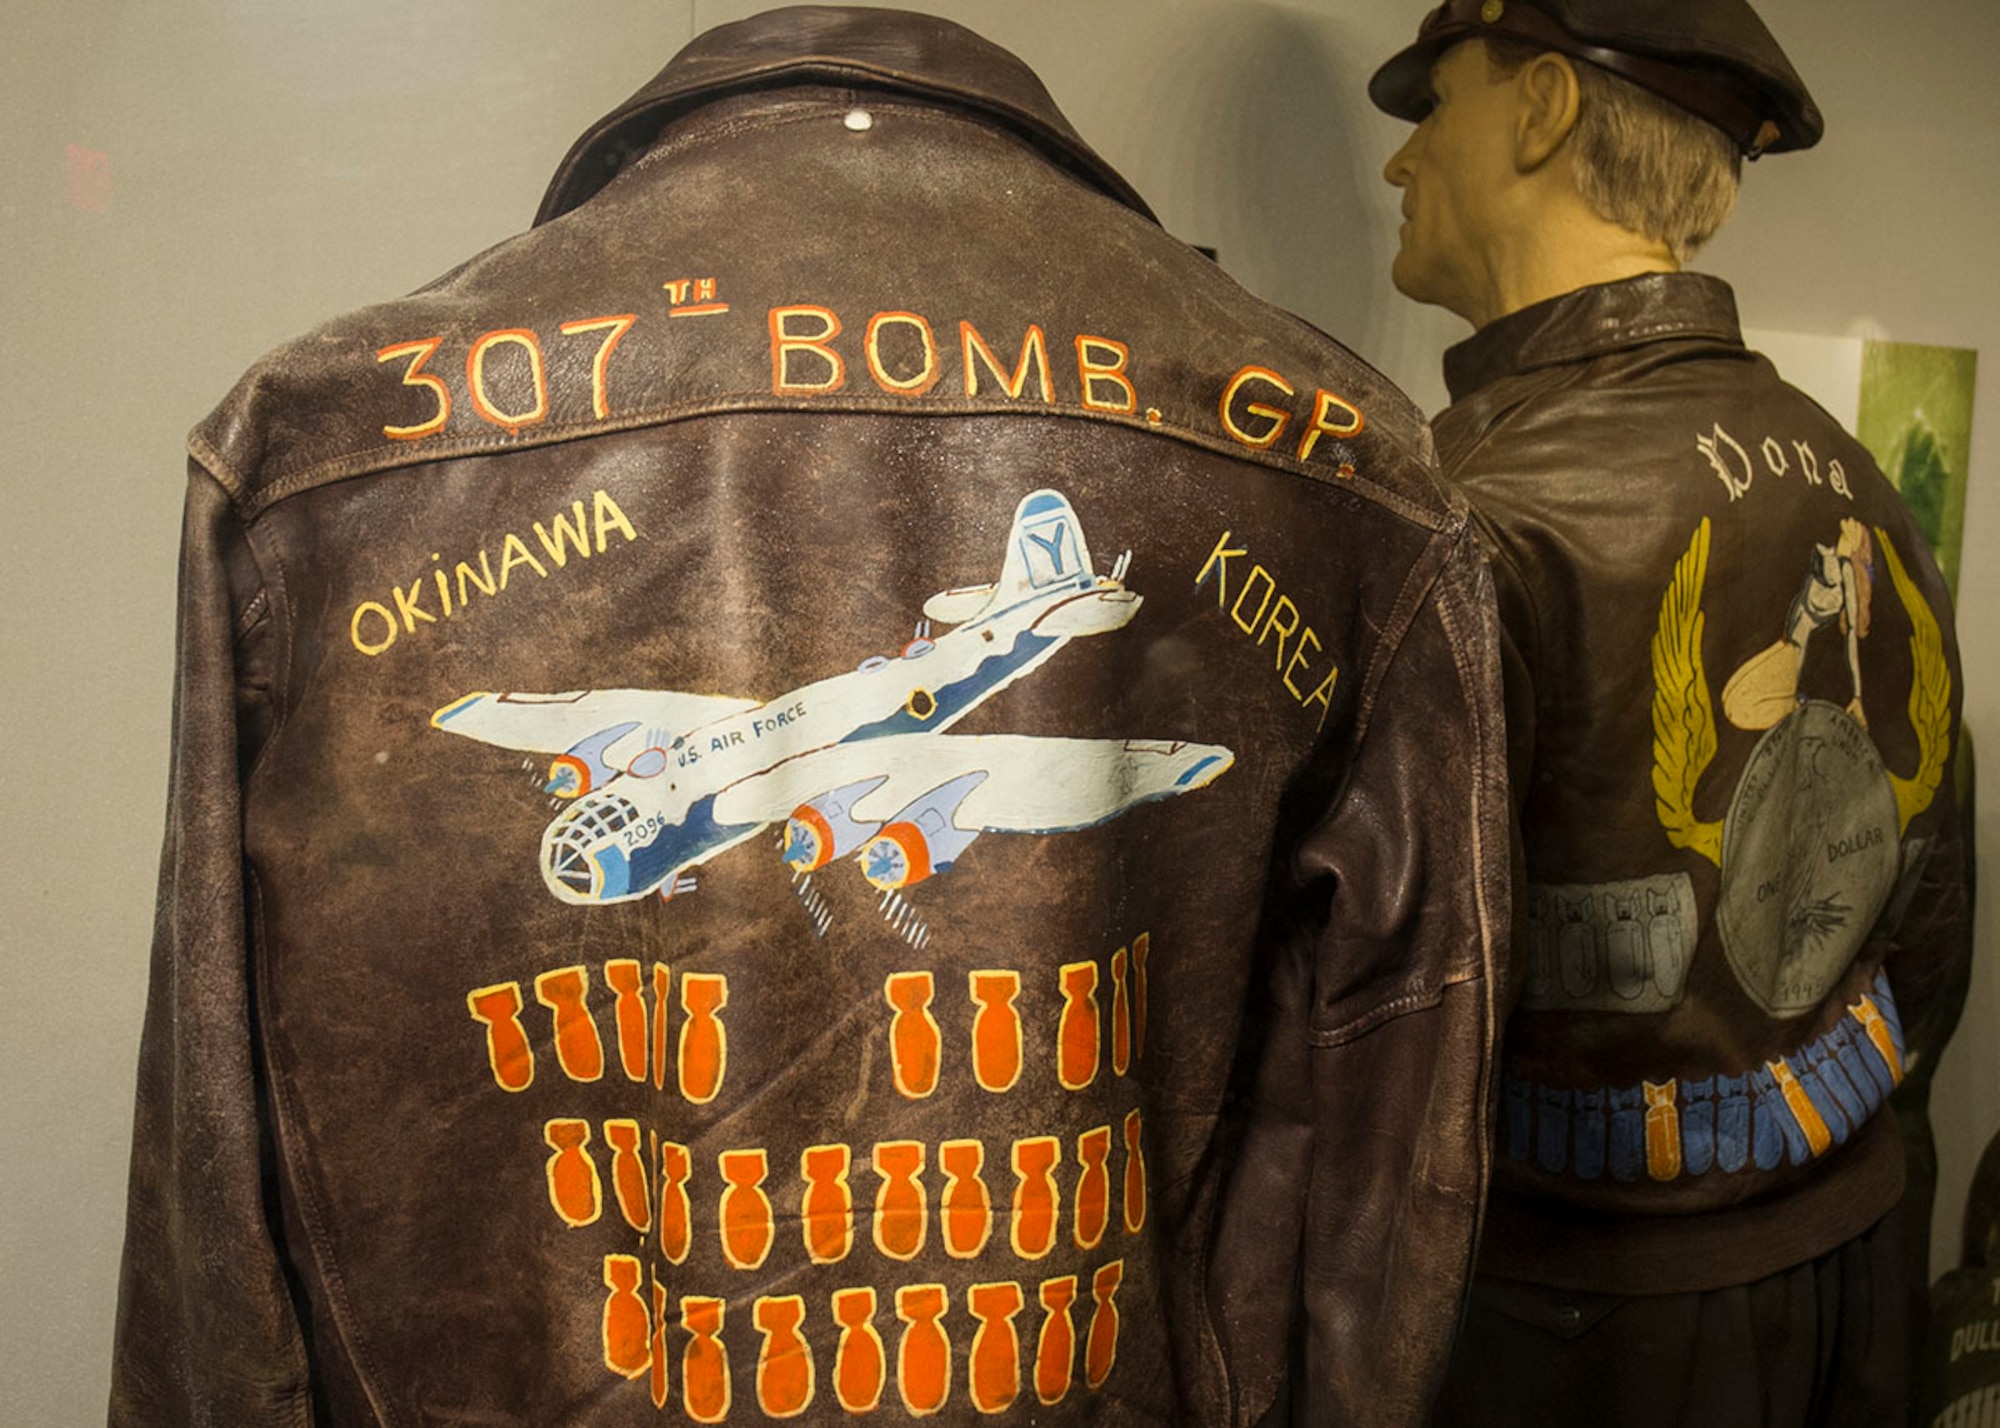 World War II Aviator Jackets exhibit at the National Museum of the U.S. Air Force. (U.S. Air Force photo by Ken LaRock)